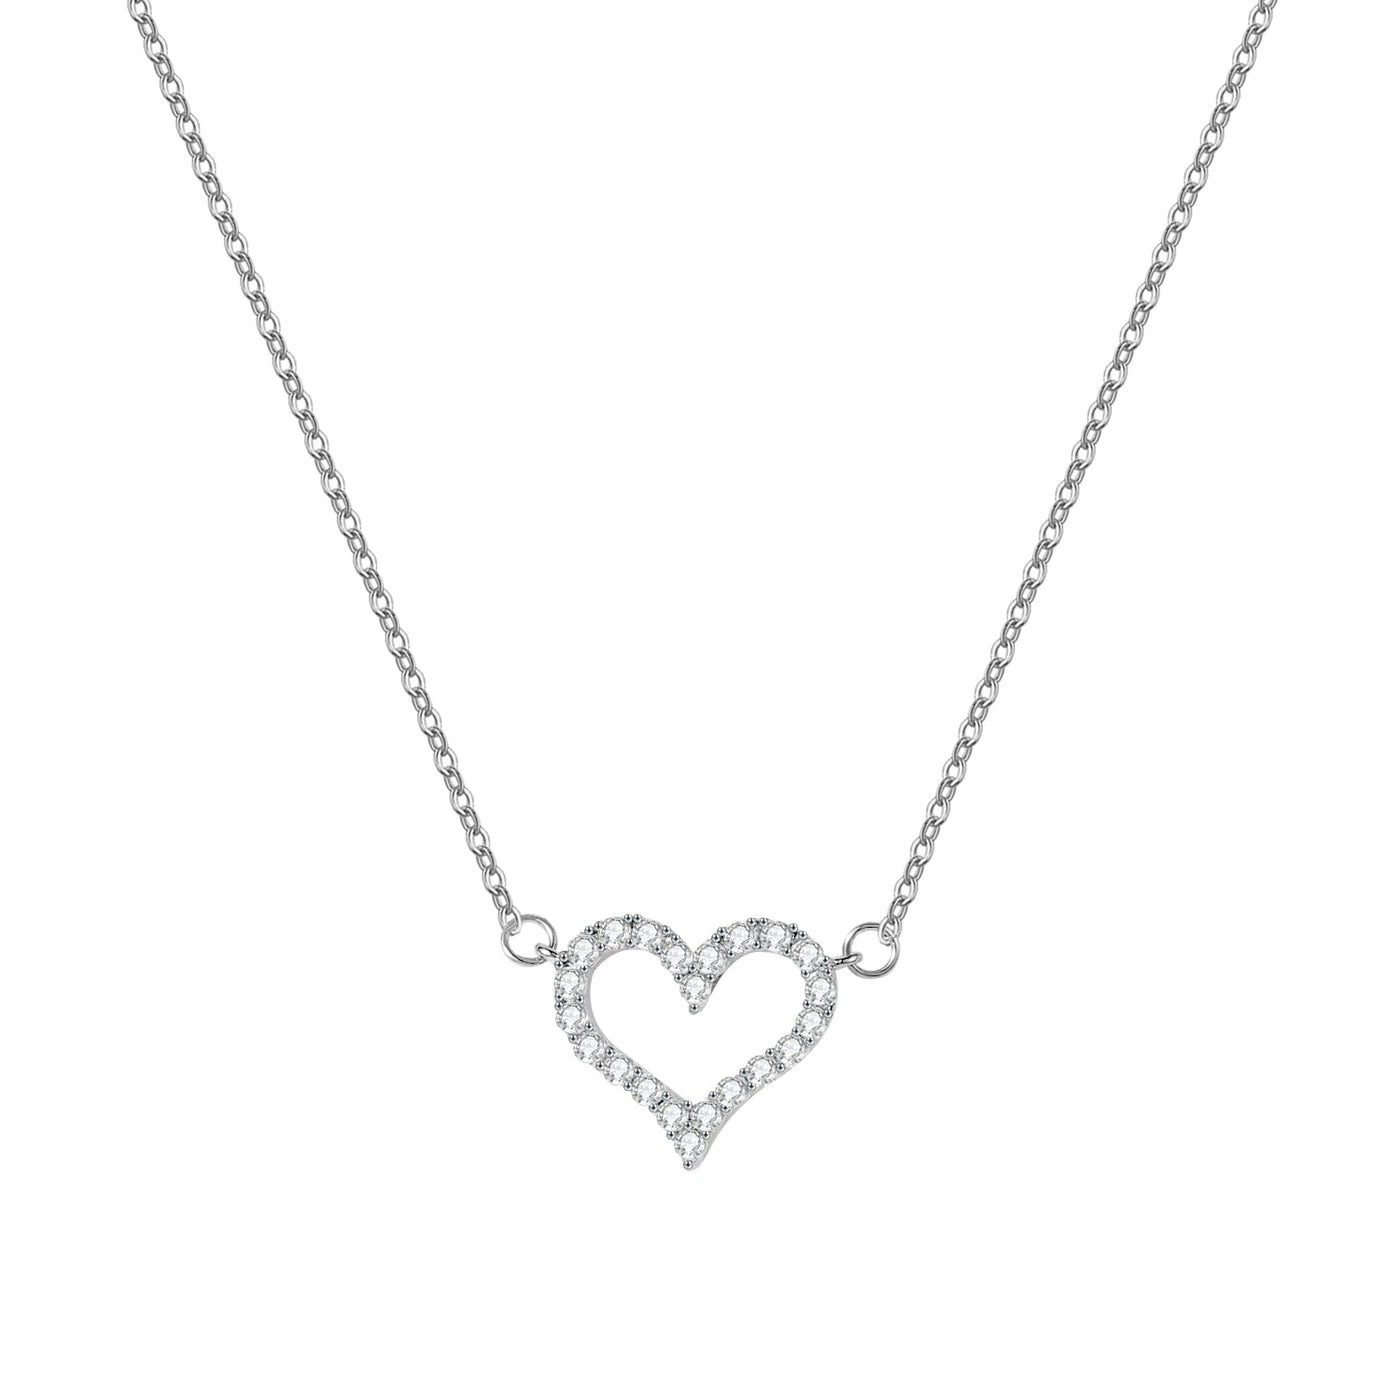 Gift for You - Love Heart Necklace - HouseofLx-18K Yellow Gold